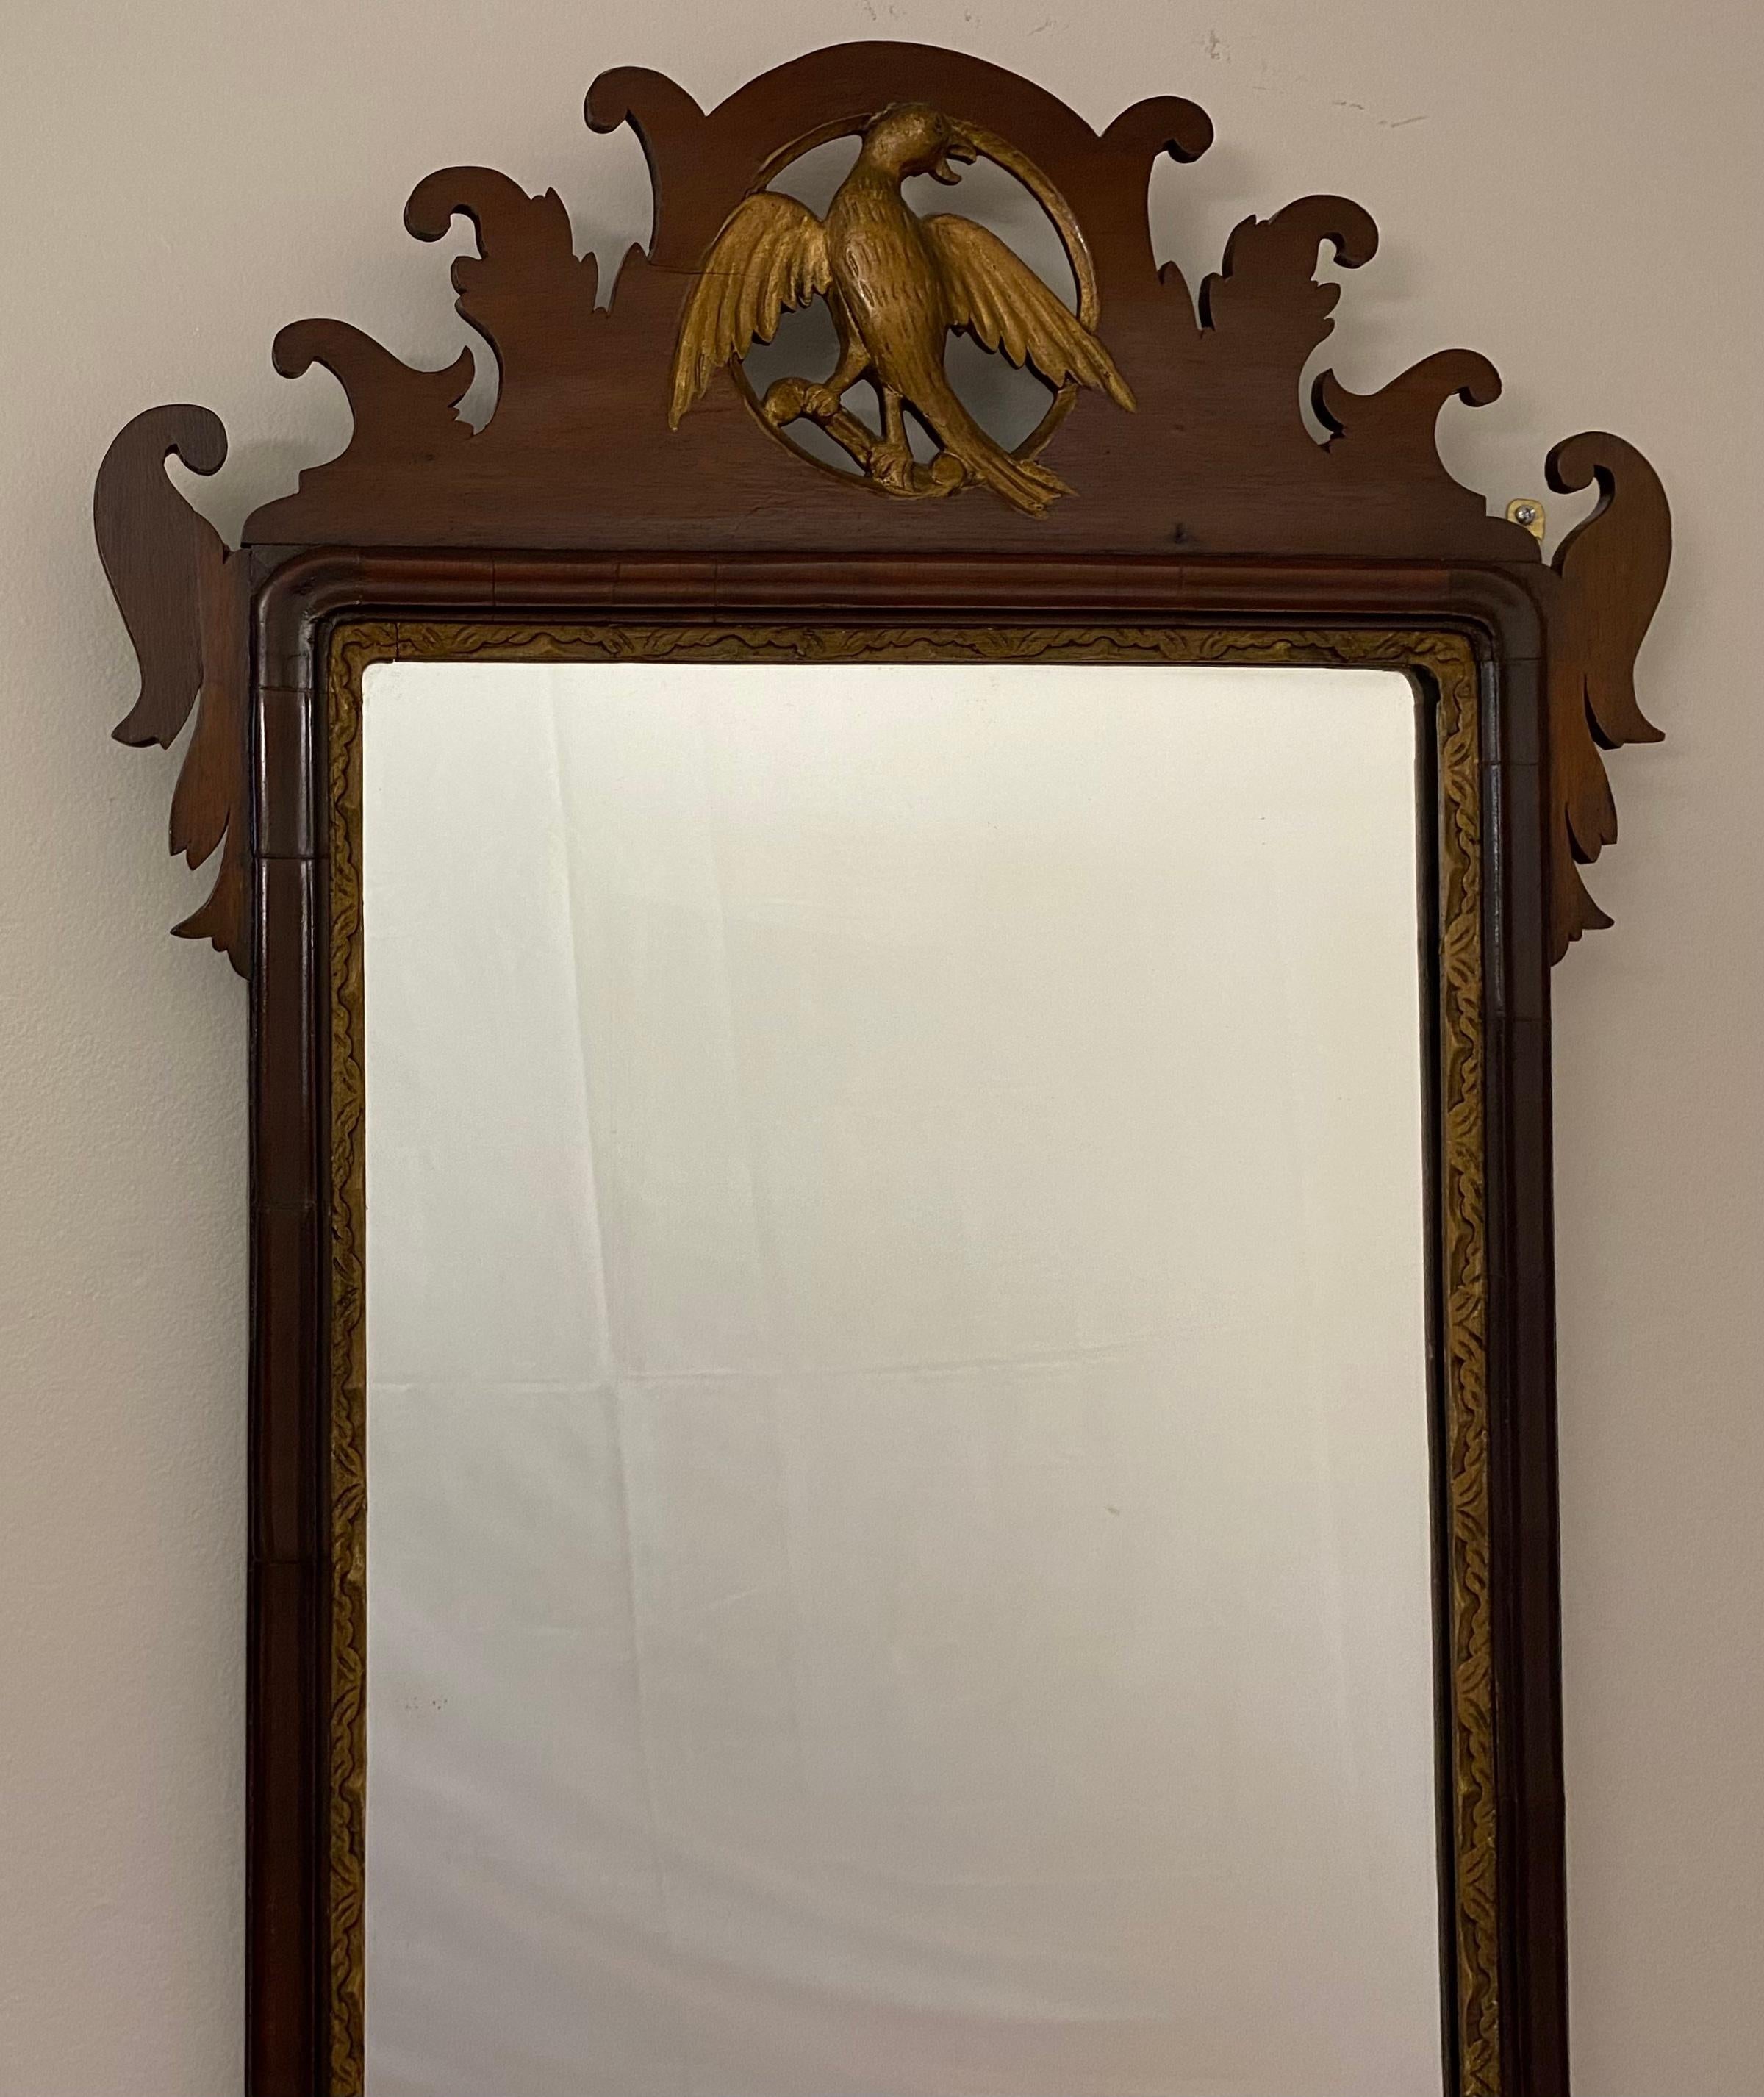 18th Century Early American Chippendale Style Wall Mirror with Eagle Pediment For Sale 1